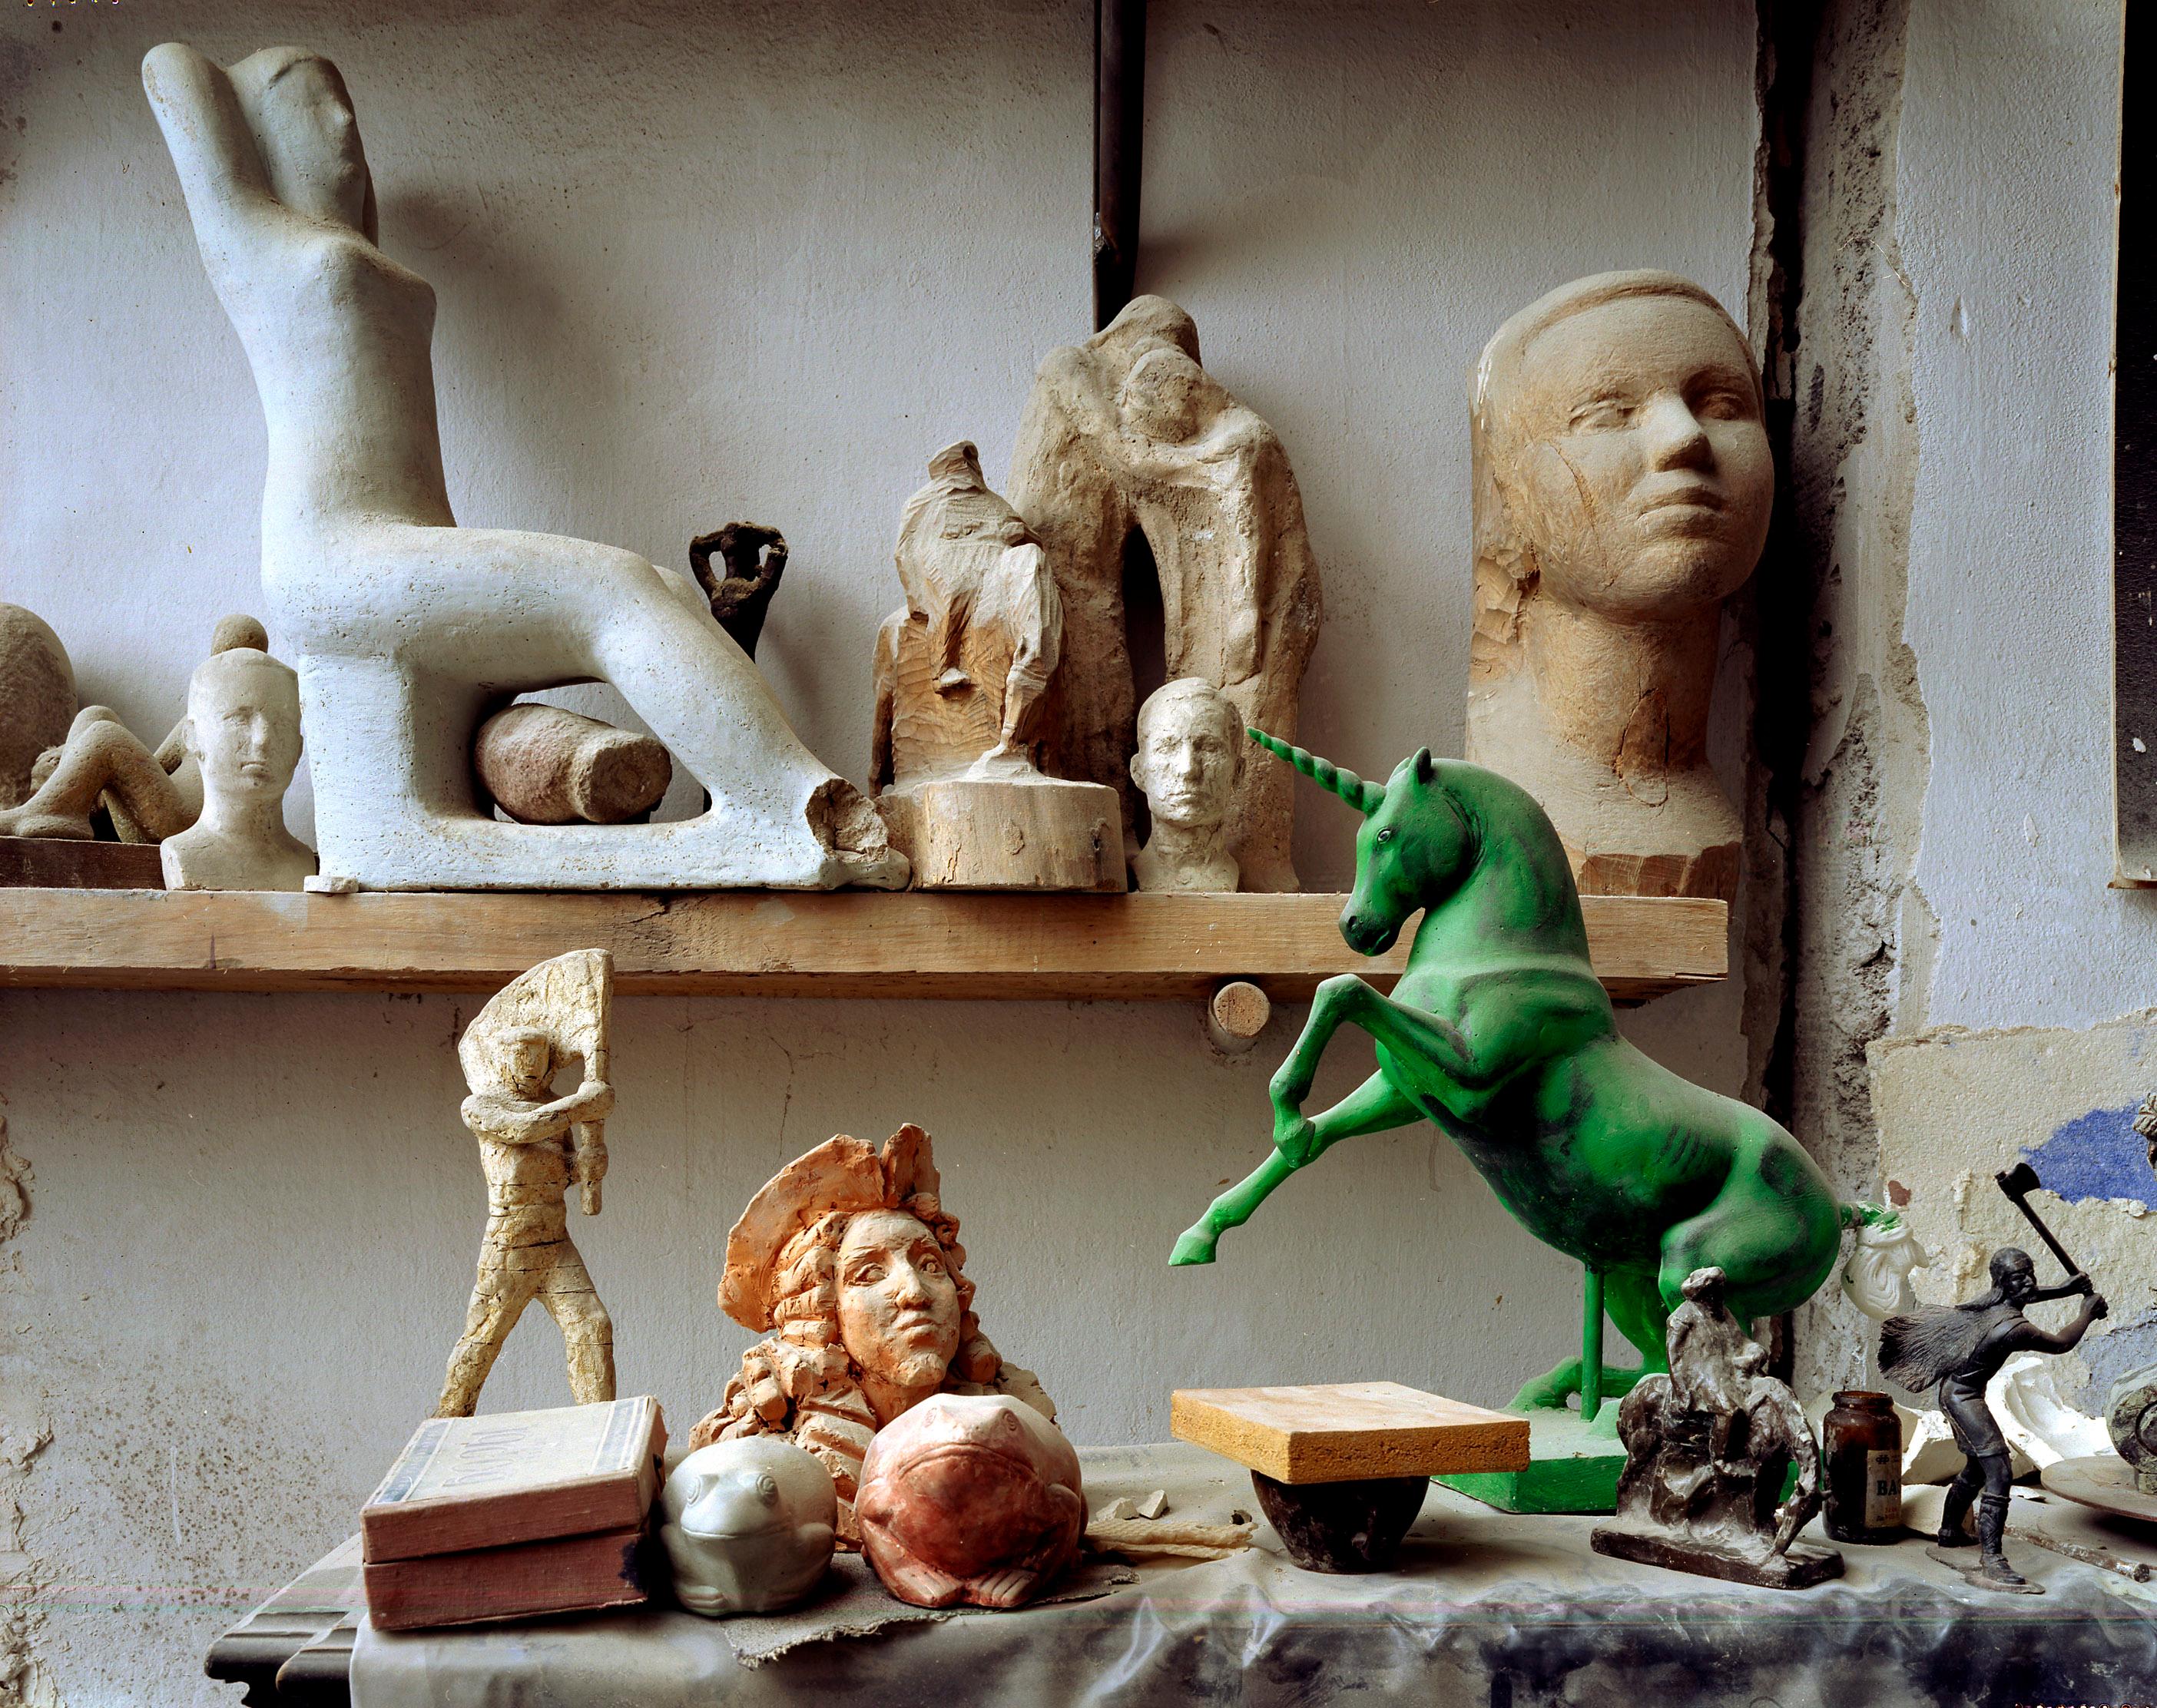 Archival Pigment Print

Sculptors studio in St Petersburg Russia

All available sizes & editions for each size of this photograph:
30" x 40” - Edition of 5 + 2 Artist Proofs
40" X 50"- Edition of 5 + 2 Artist Proofs
50" X 60"-  Edition of 5 + 2